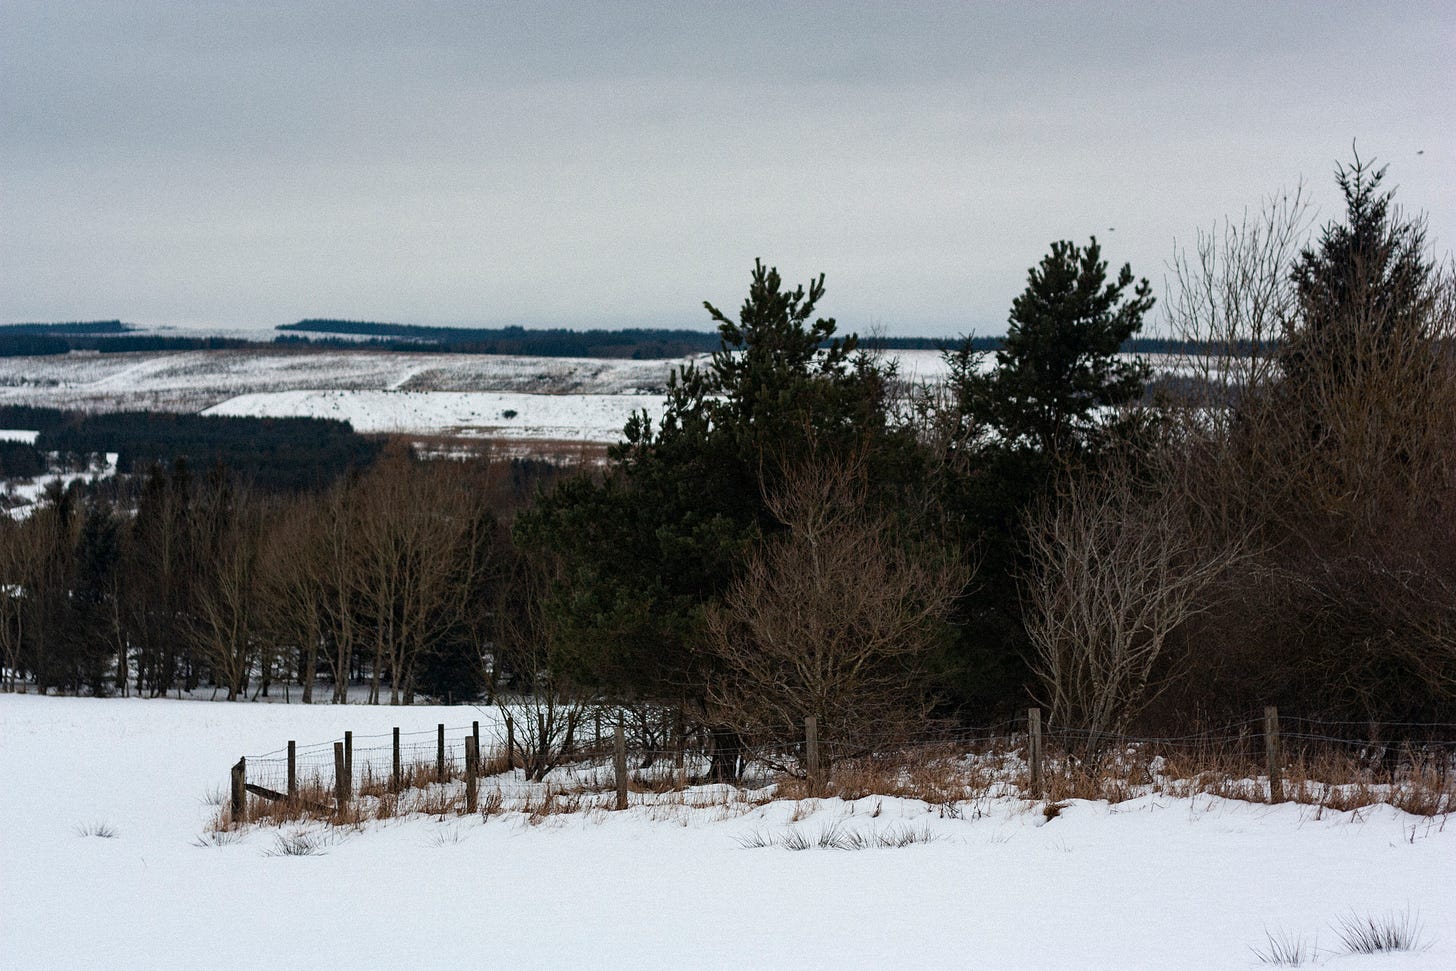 Photograph of a snow covered field, a small copse of trees are seen in the foreground, a snow peppered hill fills the background.